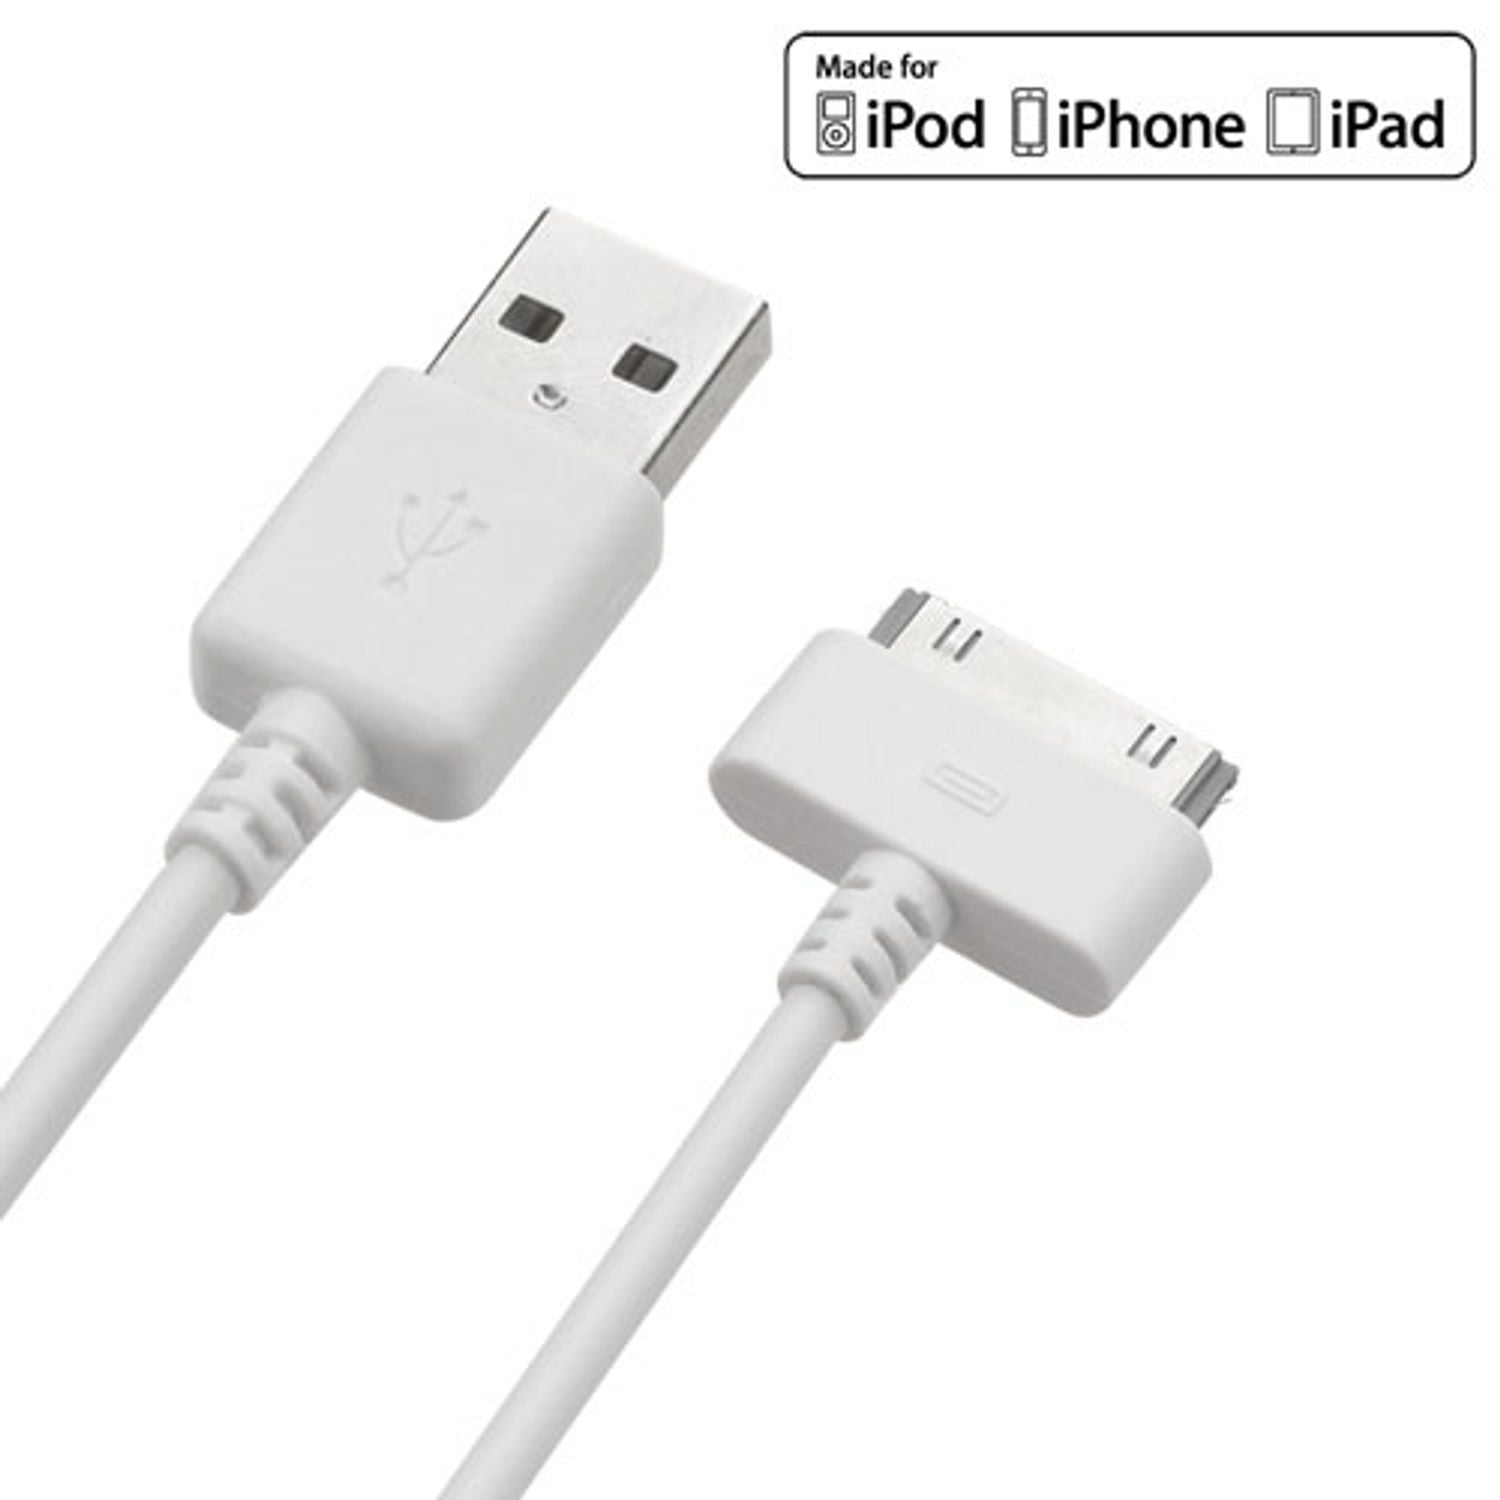 2X 10FT 30-PIN USB SYNC POWER CHARGER BLUE CABLE CONNECTOR IPHONE 4S IPOD IPAD 